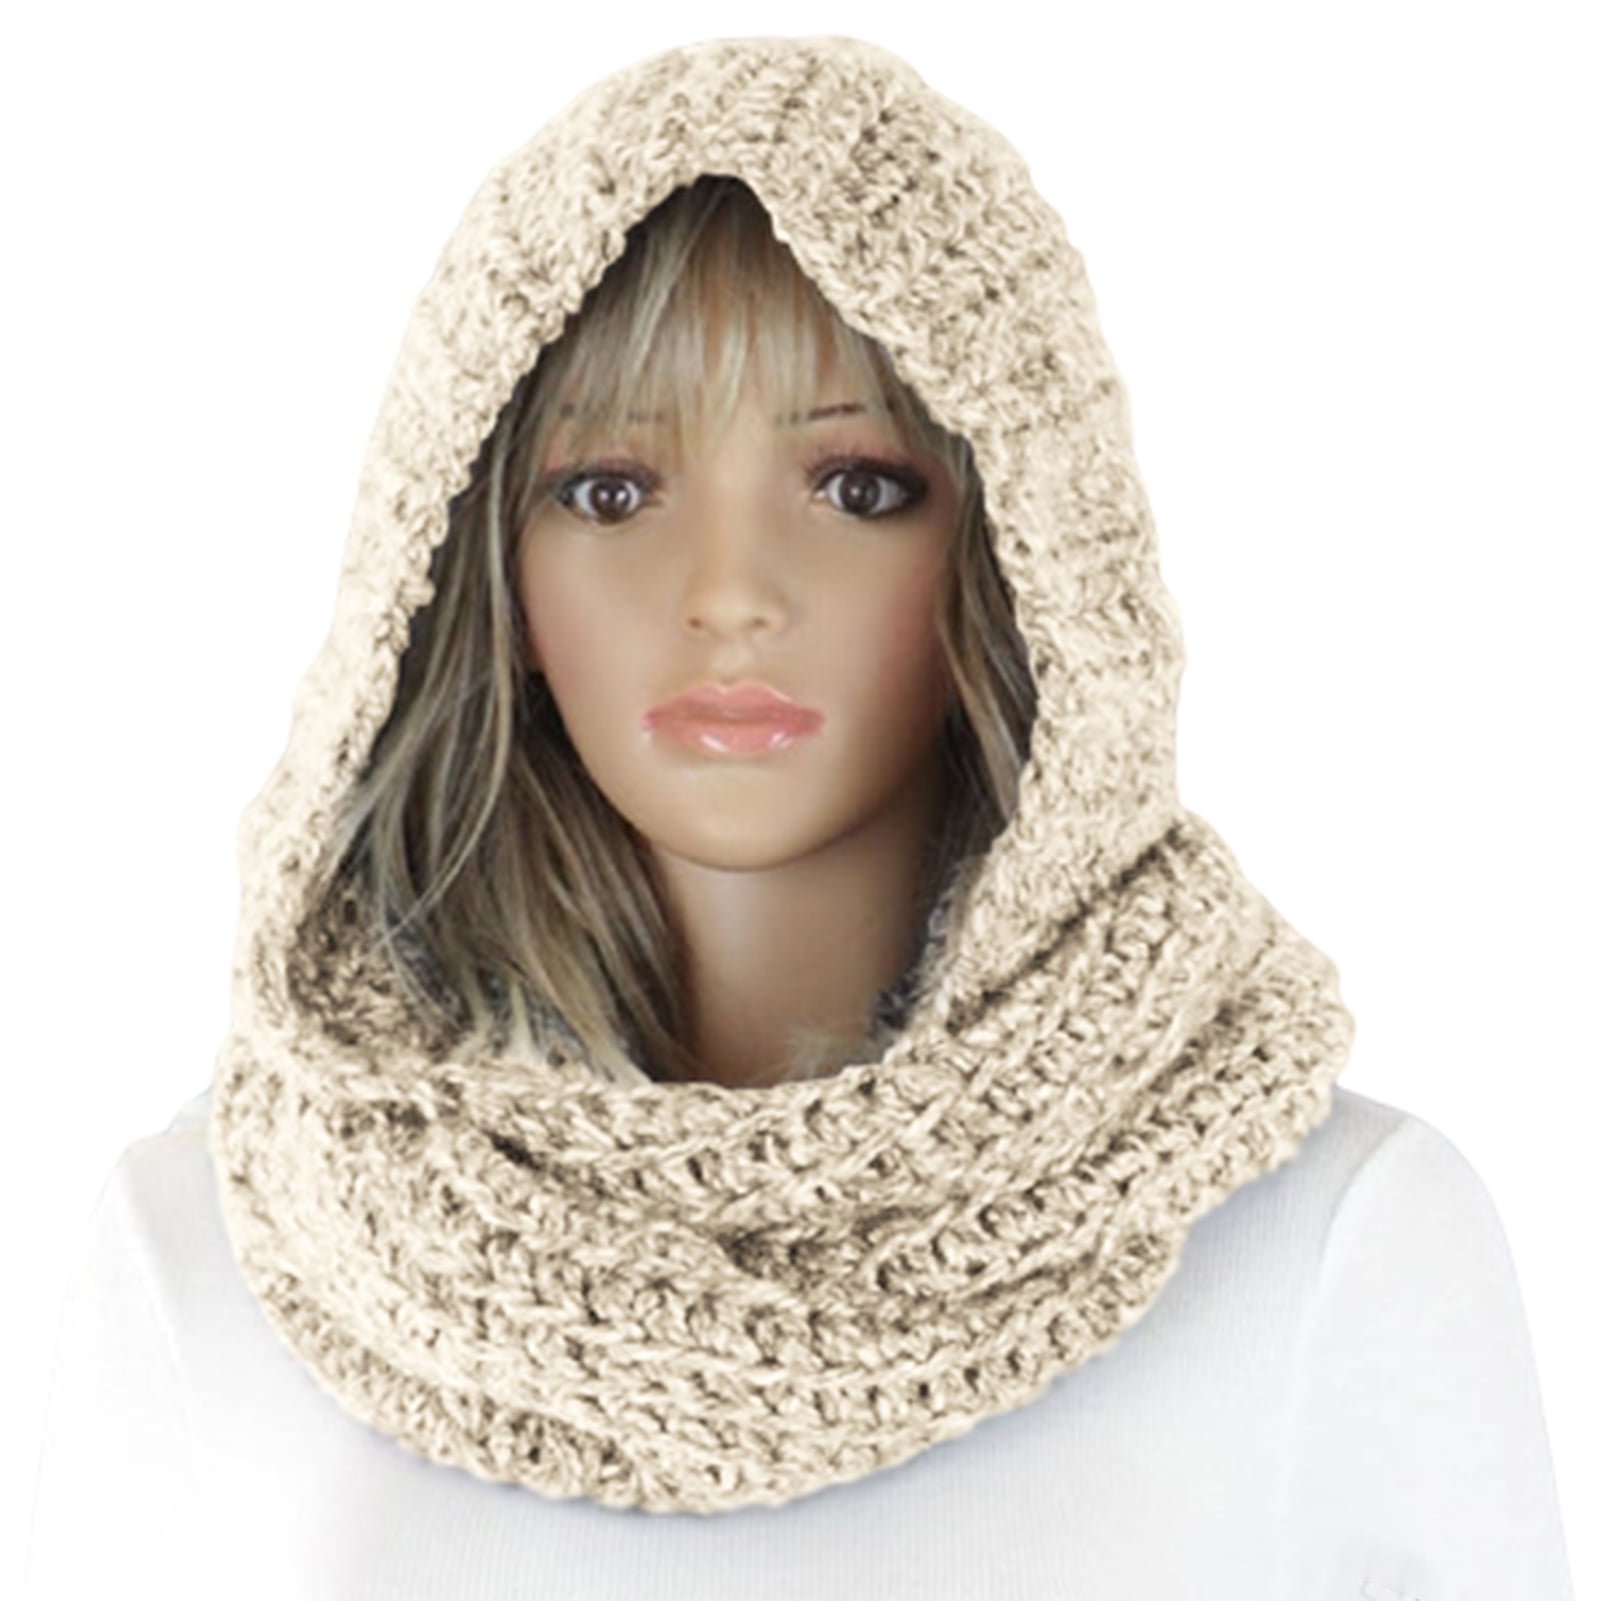 Crochet Hooded Scarf Hooded Scarf Earthy Colours Hooded Scarf Triangle Scarf Womens Hooded Scarf Gift For Women Hooded Shawl